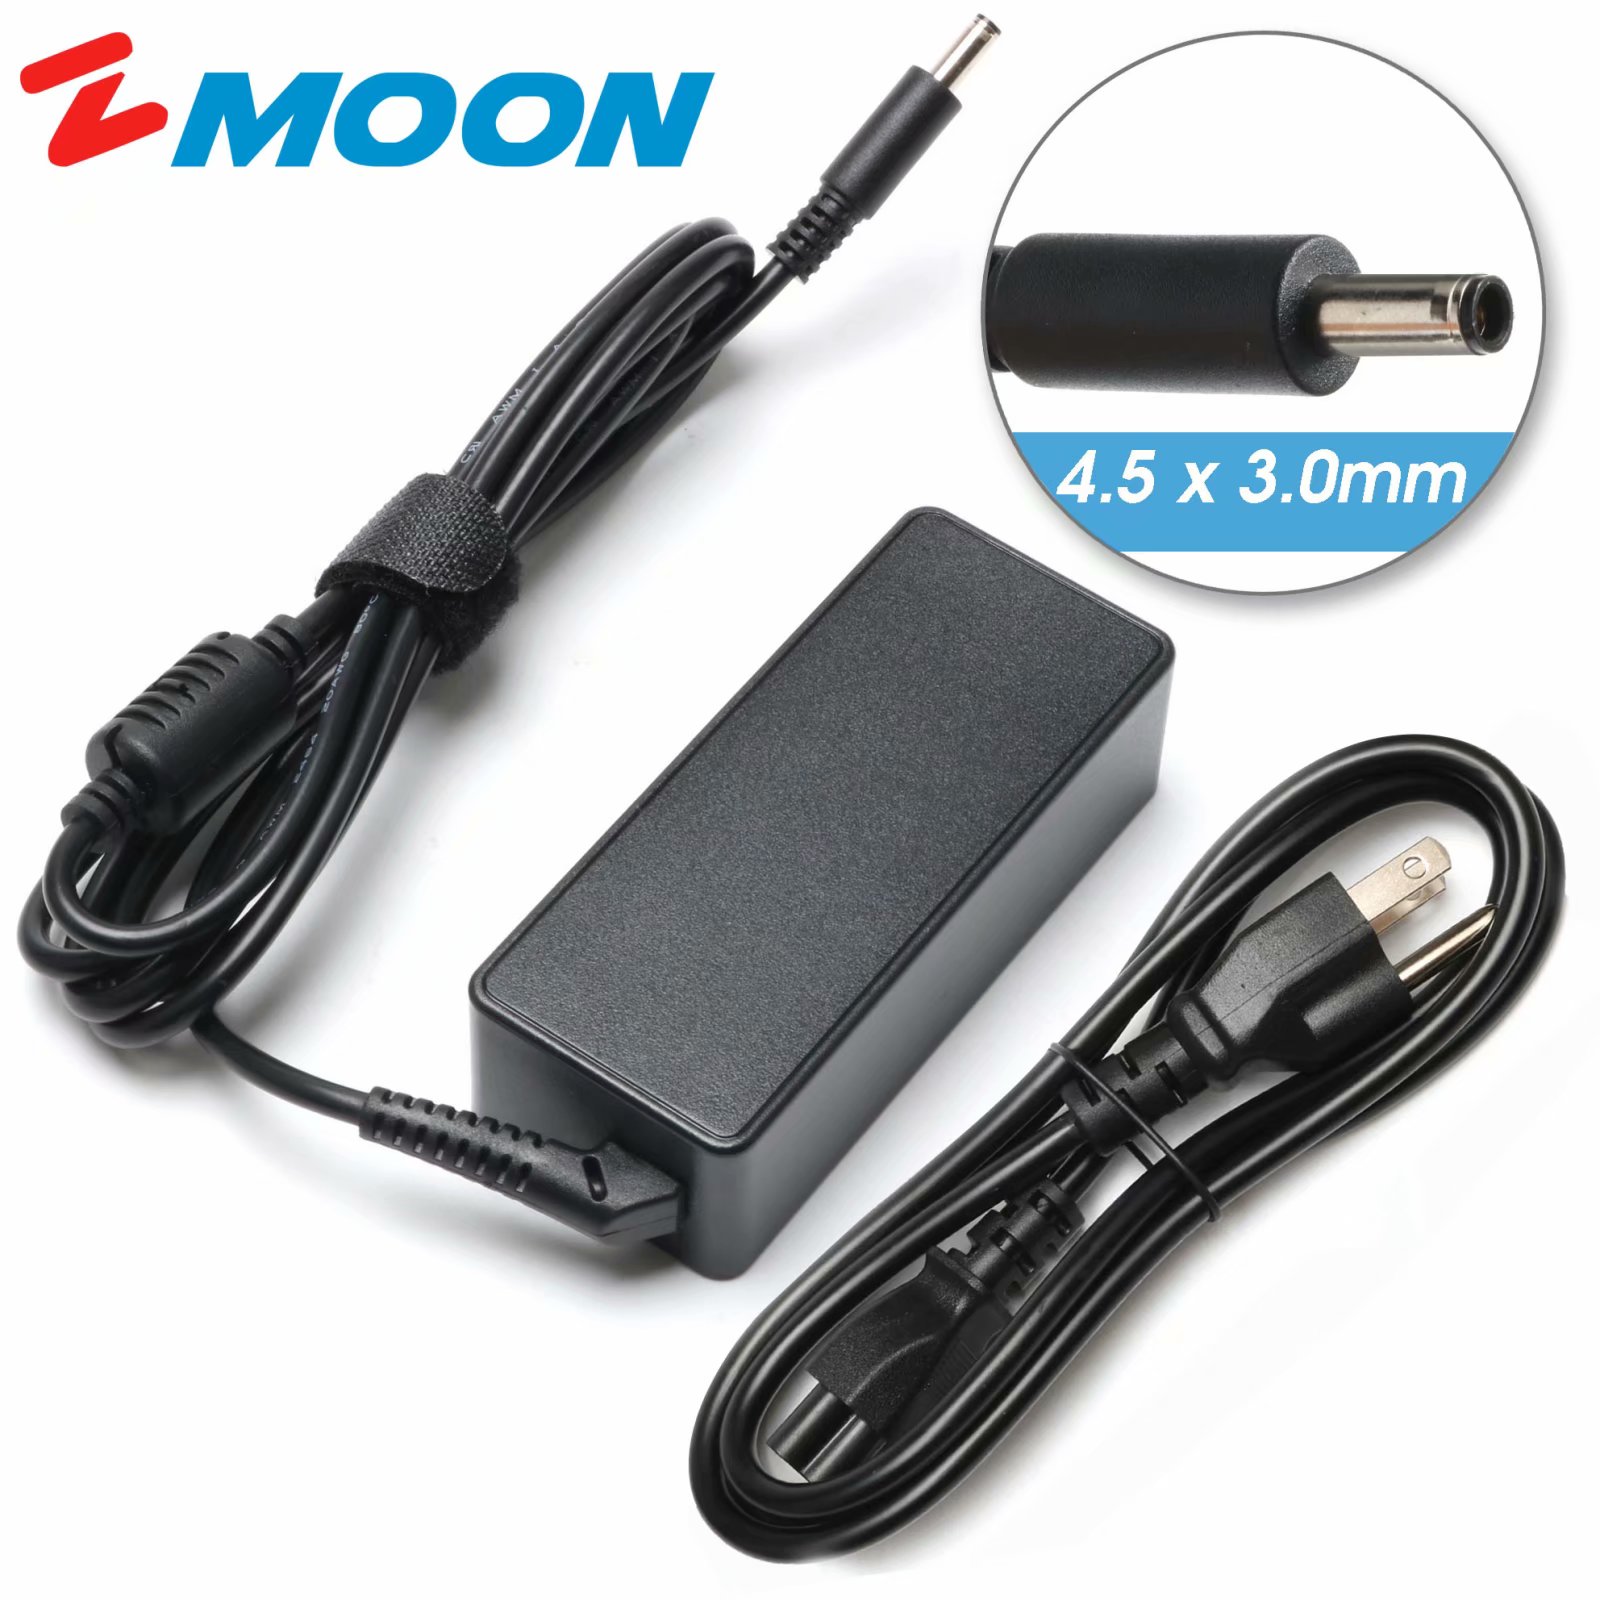 19.5V 2.31A 45W AC Adapter Charger for Dell Inspiron 11 13 14 17 15 5000 3000 7000 Series 5559 5558 5570 HK45NM140 LA45NM131 LA45NM140 HA45NM140 KXTTW LA45NM121 Laptop Power Supply Cord - image 1 of 11